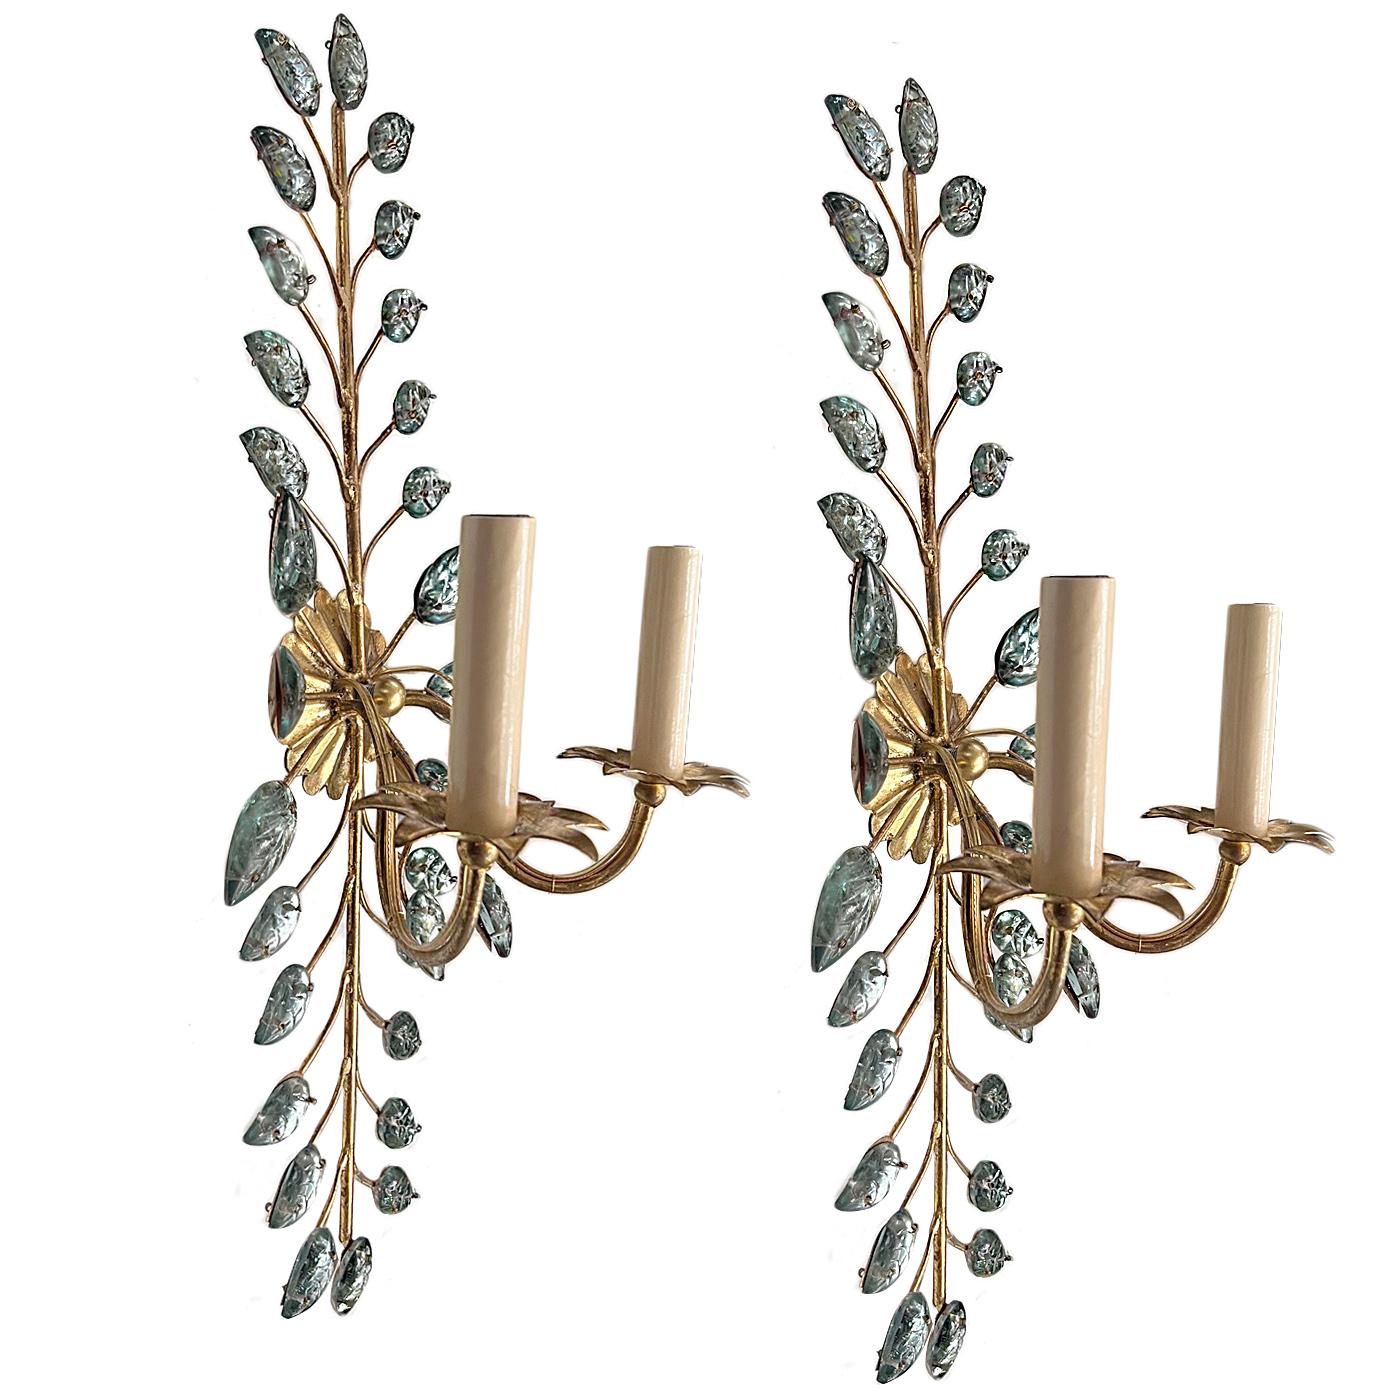 Set of four French circa 1940's gilt metal two-arm sconces with molded glass leaves. Sold per pair.

Measurements:
Height: 24